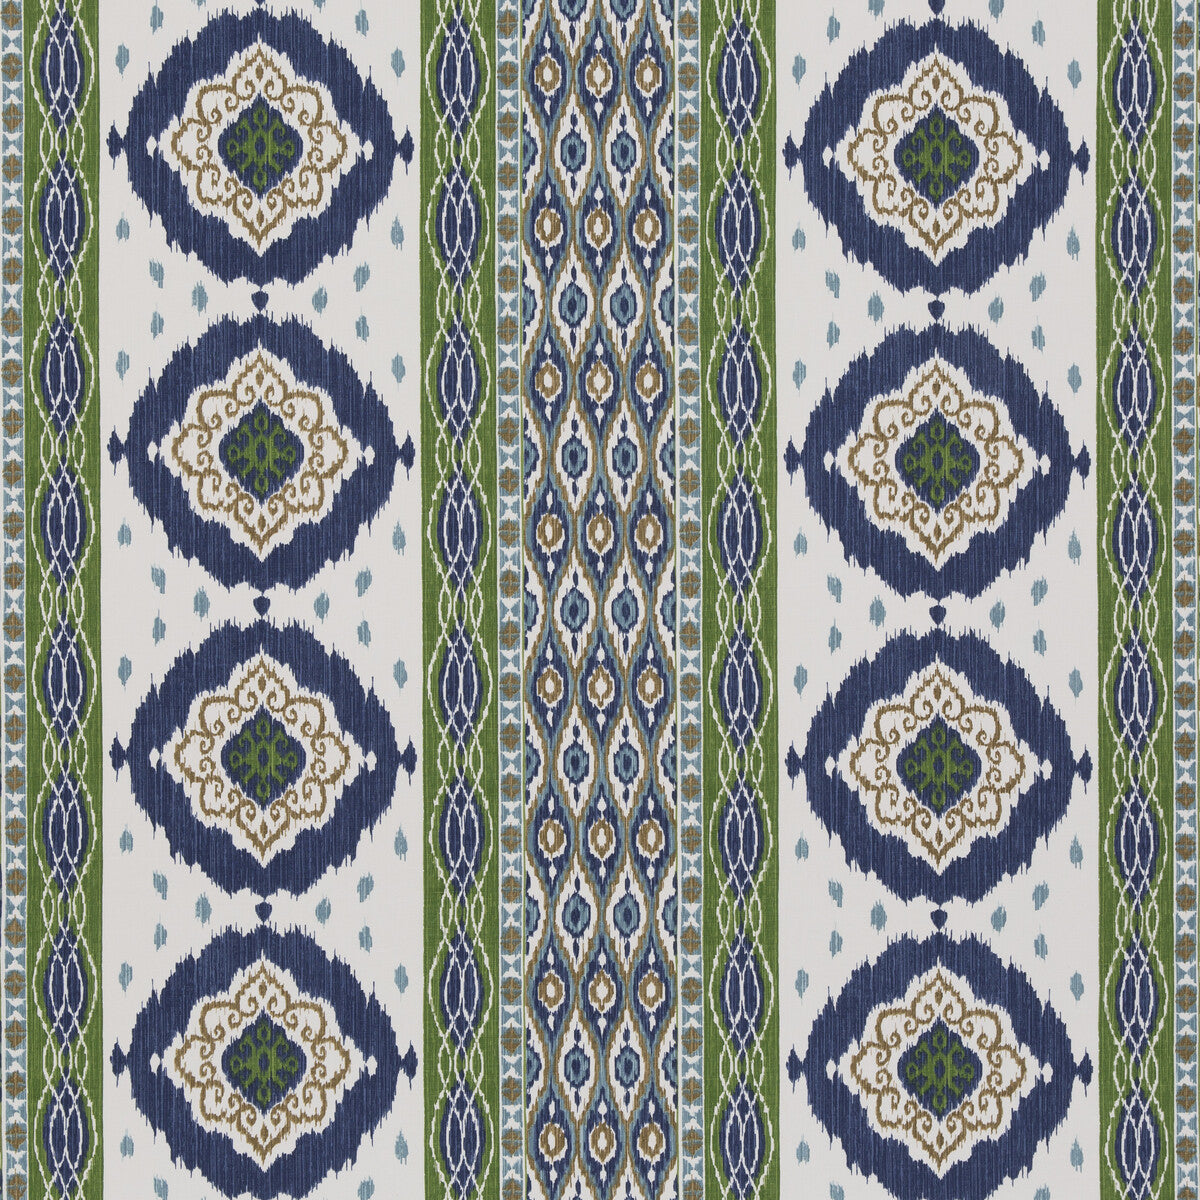 Crosby fabric in blue/green color - pattern BP10936.2.0 - by G P &amp; J Baker in the Caspian collection